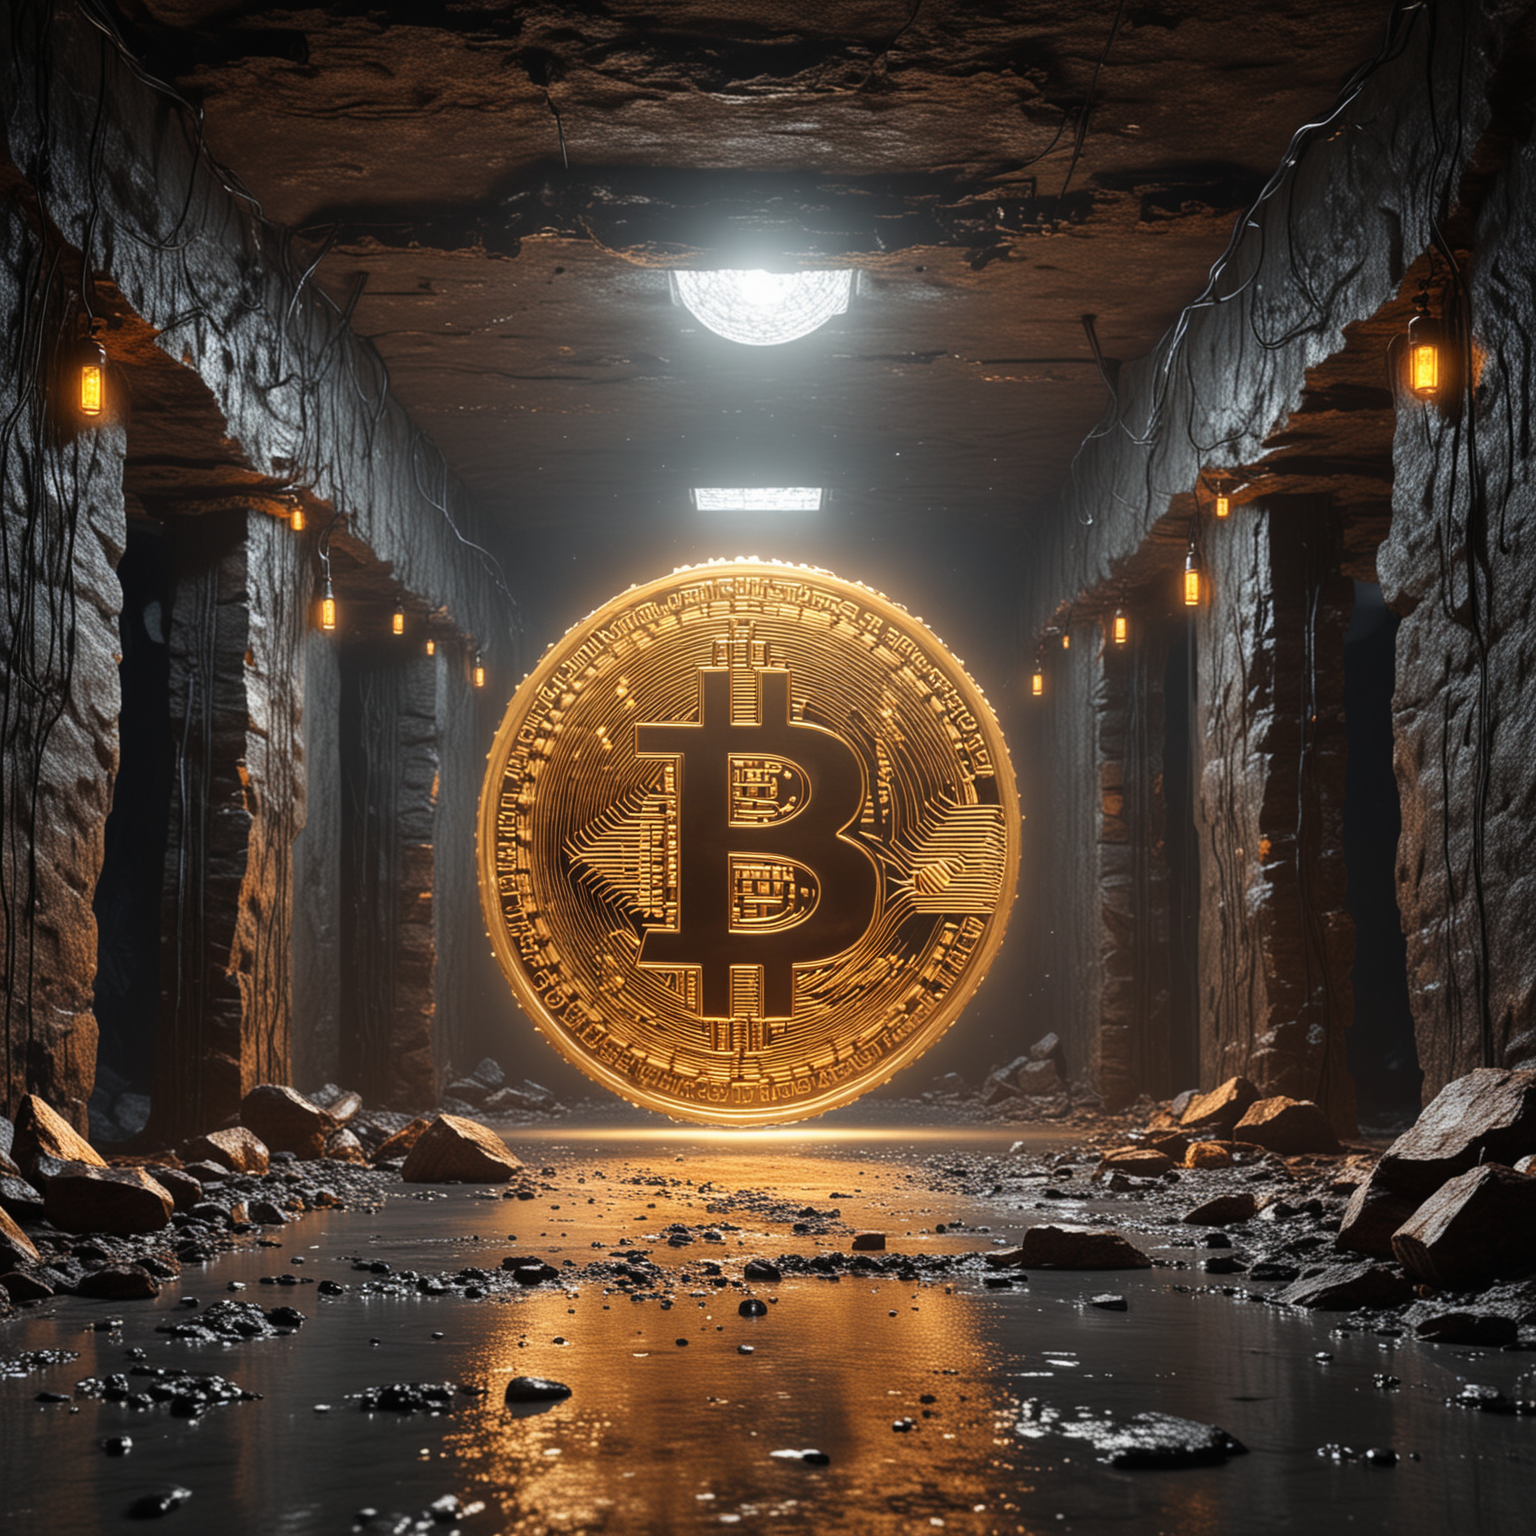 Futuristic Bitcoin Mining Entrance with Symbolism of Innovation